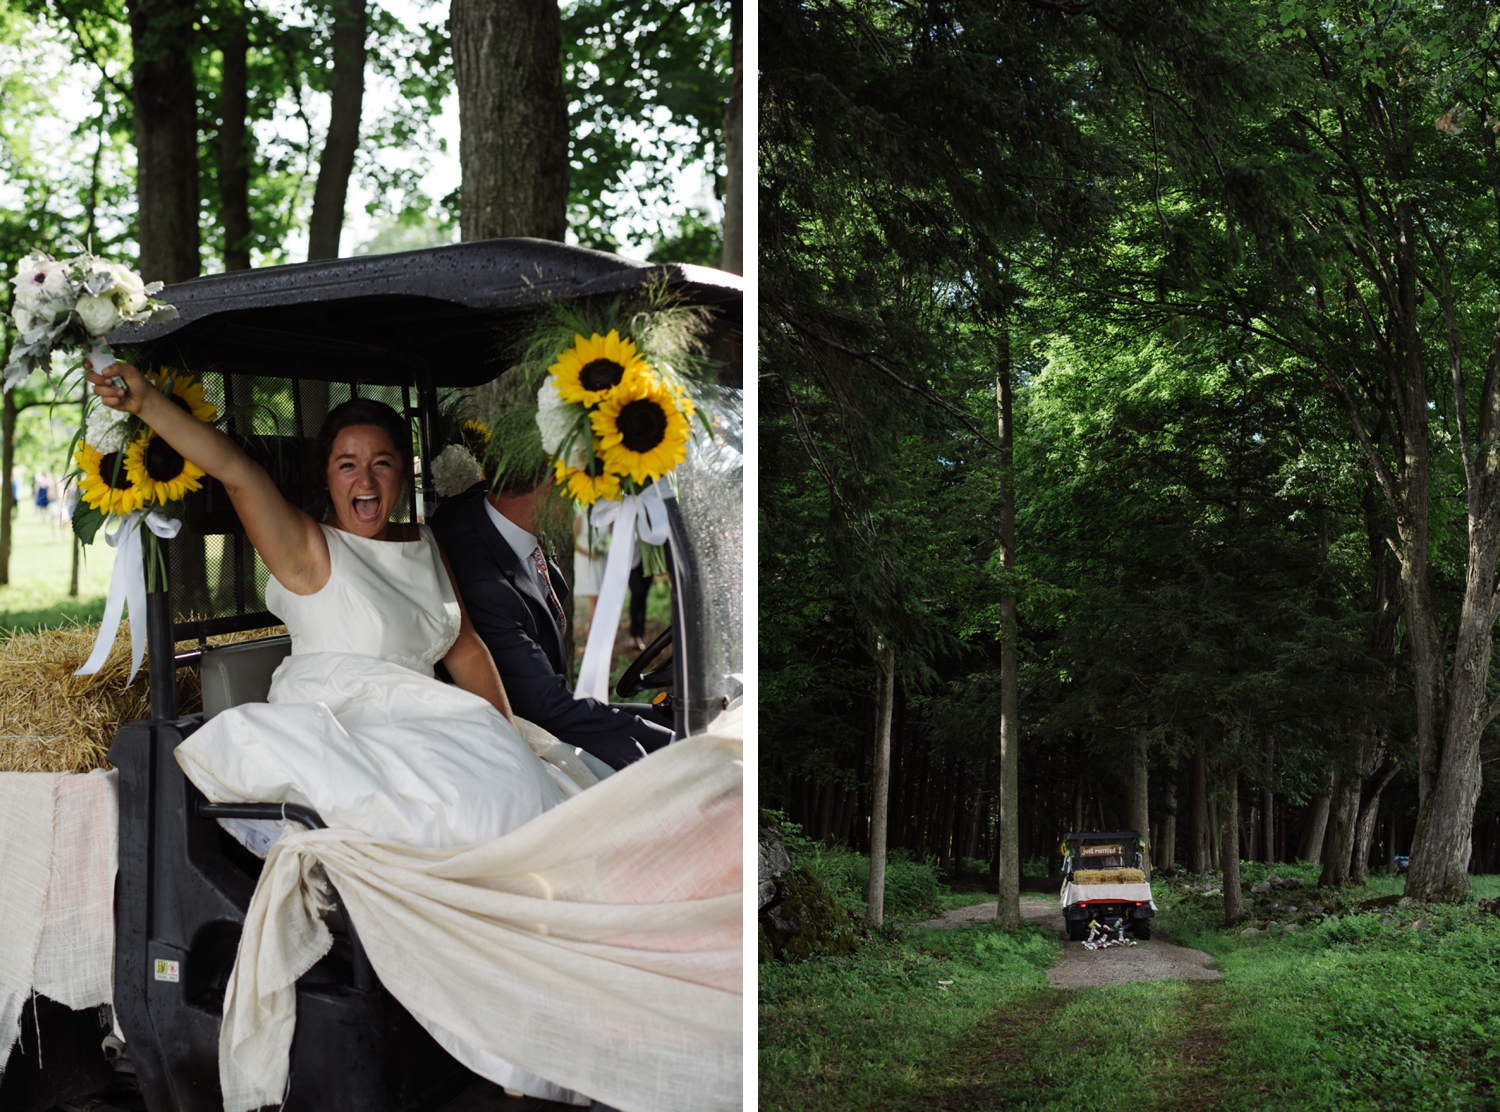 Couple going to their tented reception in a golf cart